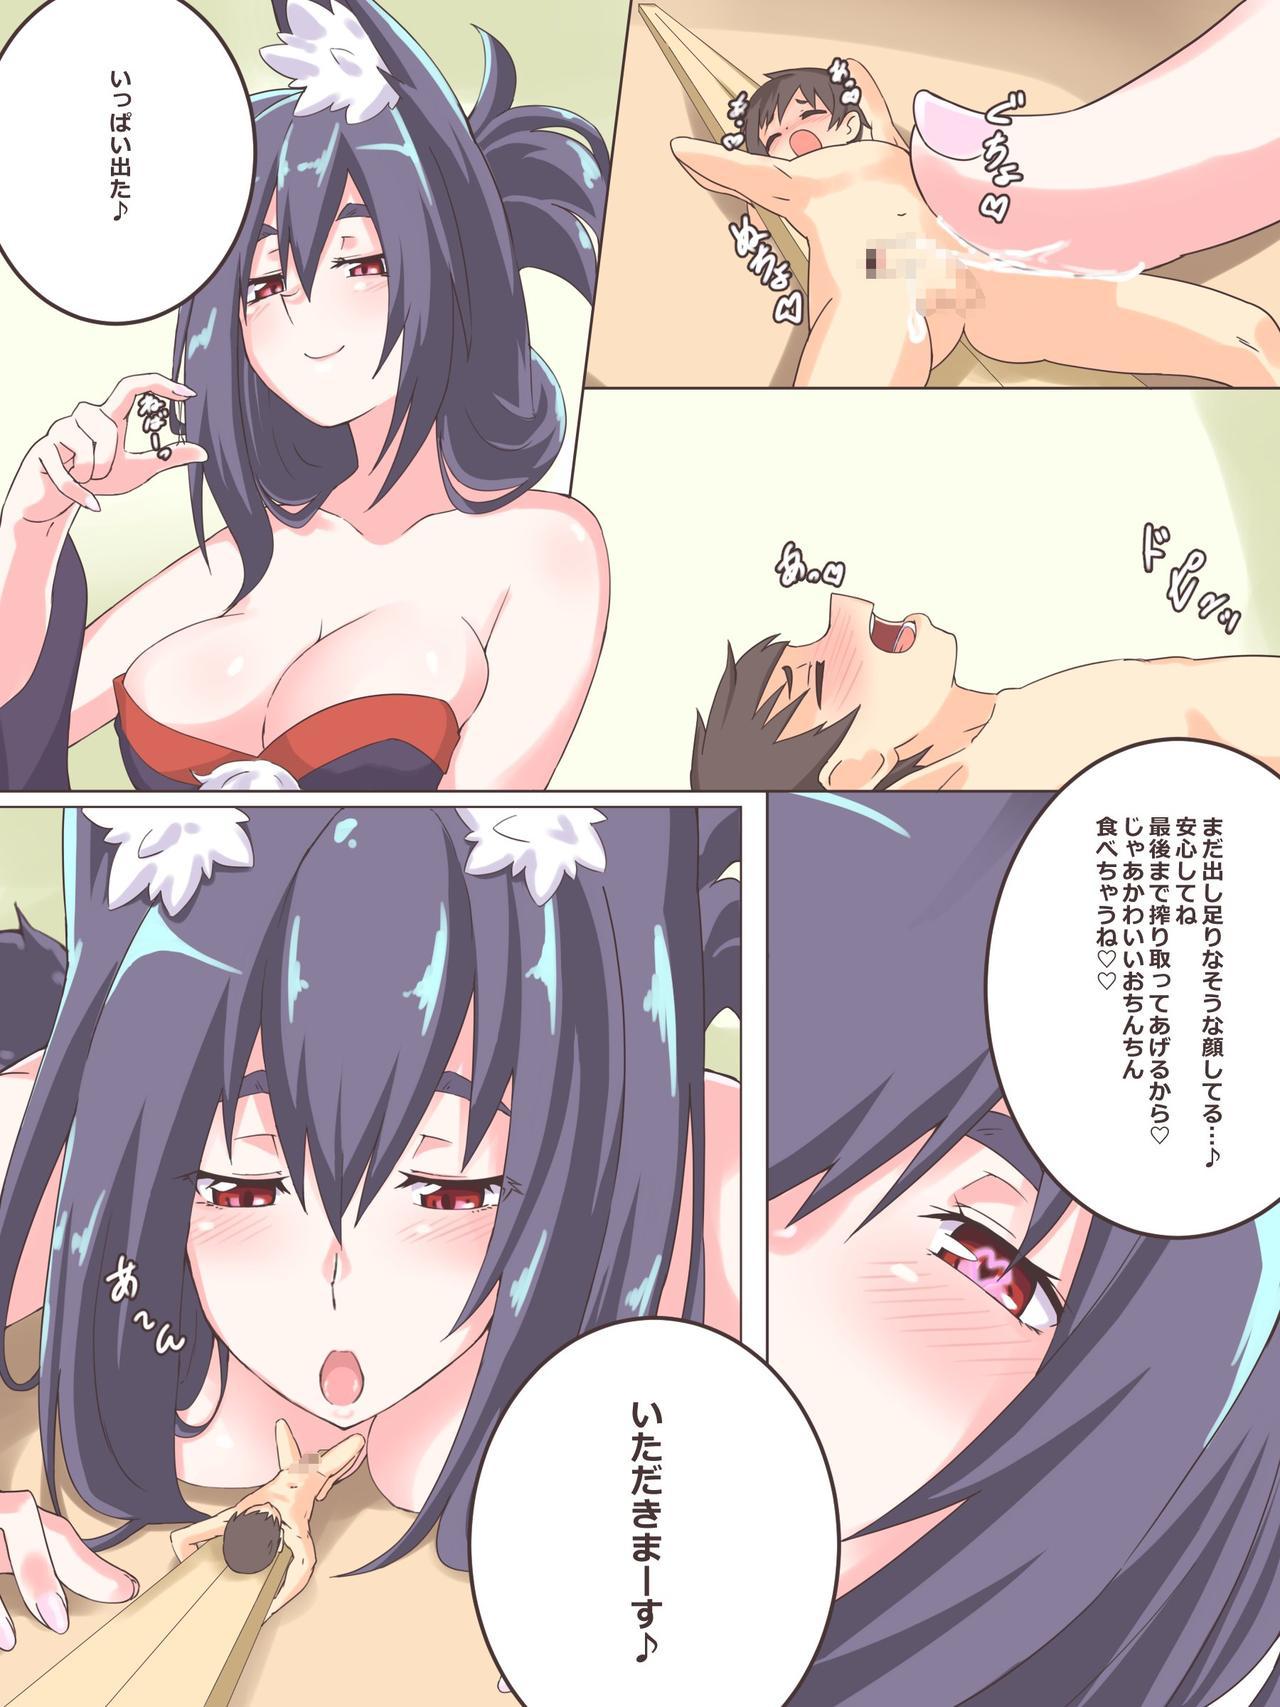 Farting にわかポテト(Mサイズ) Small Vore Doujinshi 2 - Original Gay 3some - Page 3